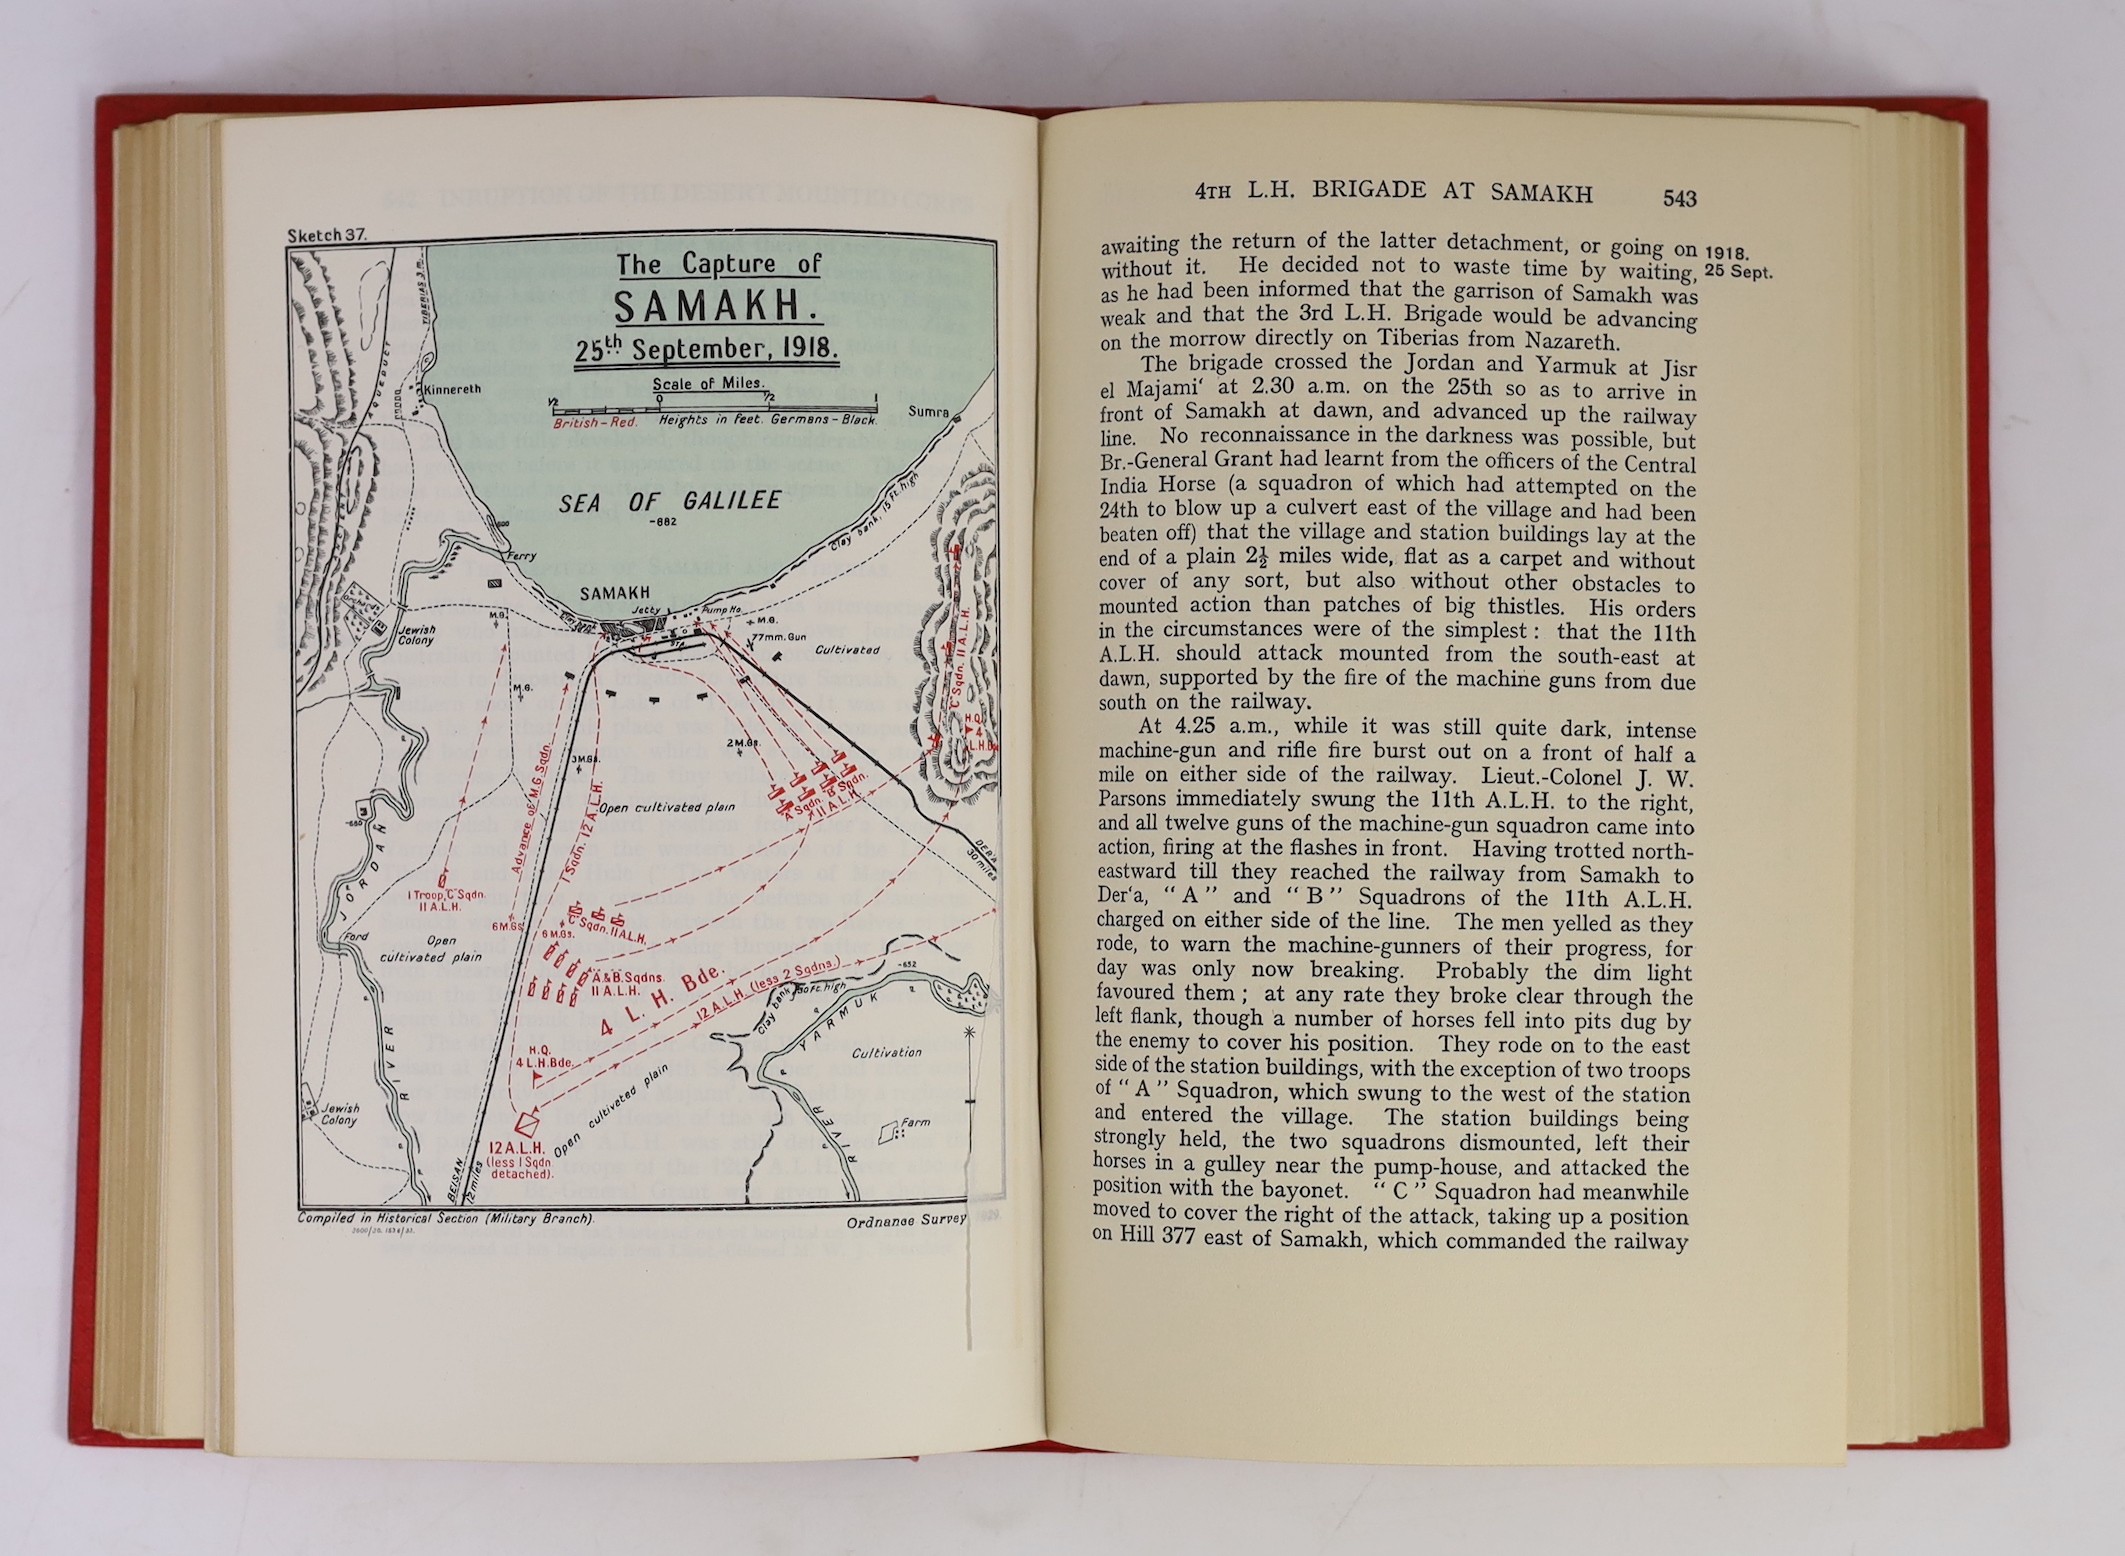 MacMunn, George Fletcher, Sir and Falls, Cyril, Military Operations Egypt & Palestine, 3 vols and 2 cloth drop-front boxes, 8vo, original red cloth, with 38 folded maps, sketches and photographs, HMSO, London, 1928-30